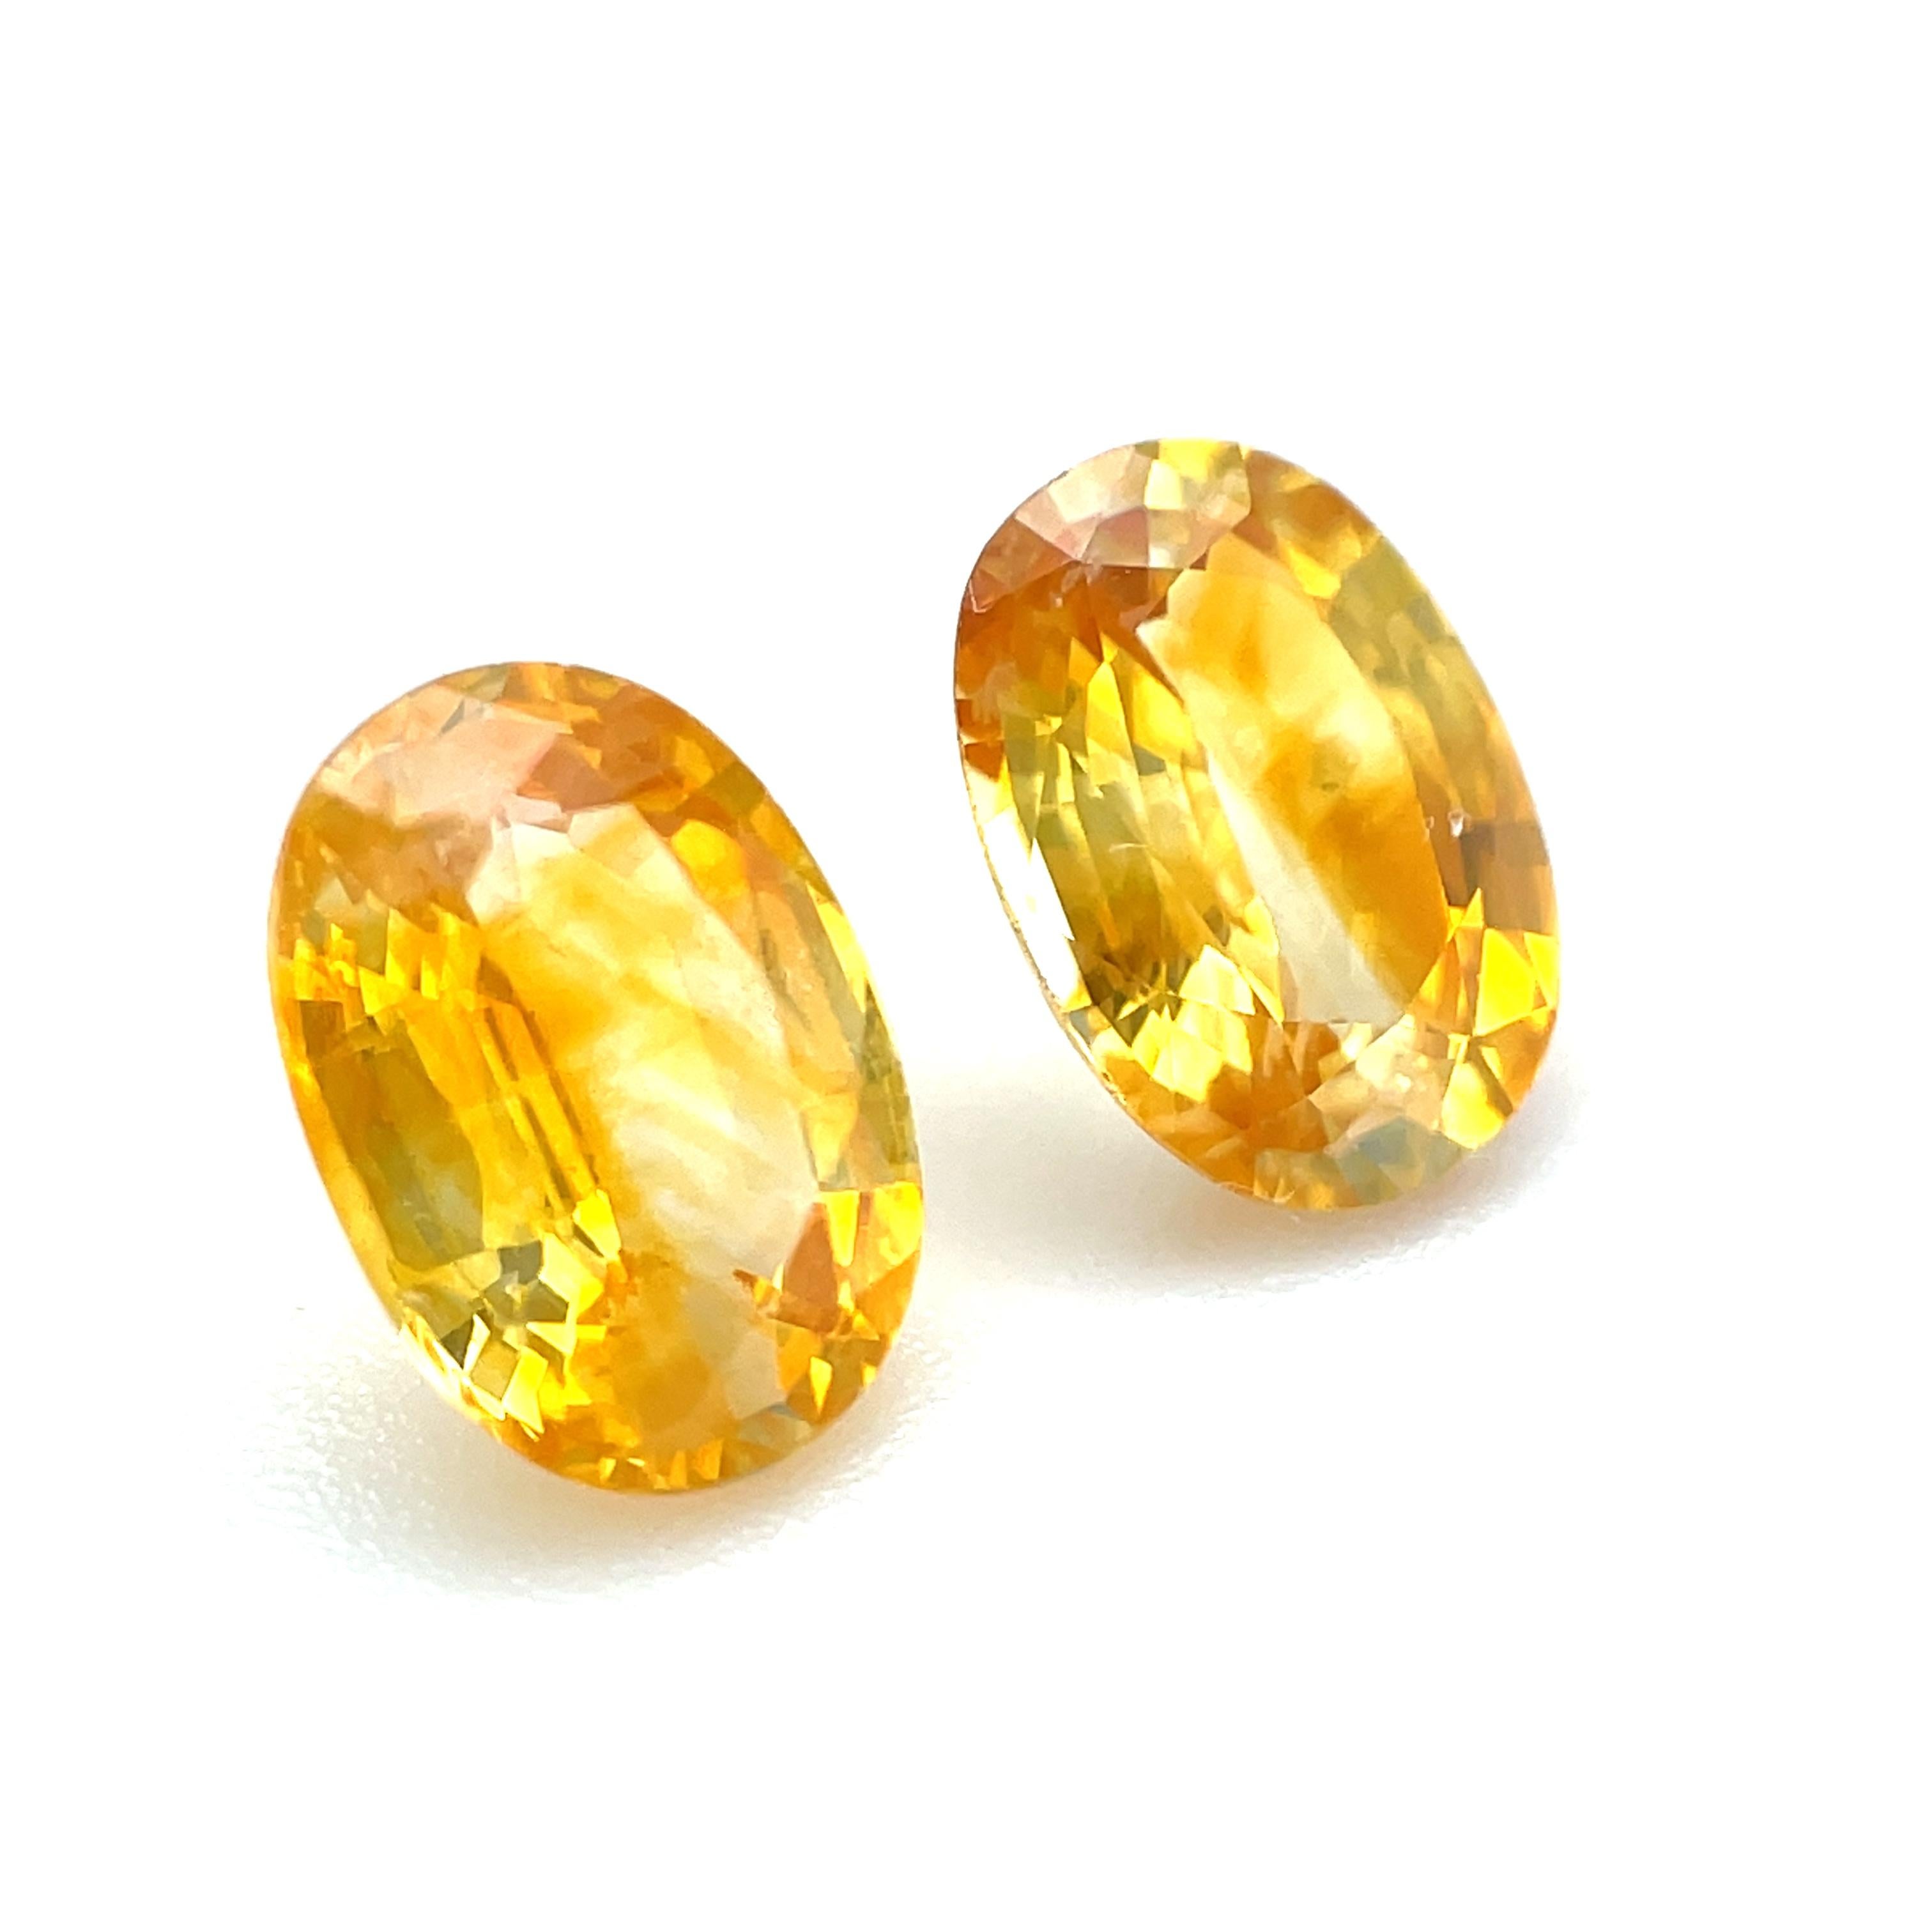 Women's or Men's 1.92 Carat Total Oval Yellow Sapphire Pair for Earrings, Loose Gemstones For Sale